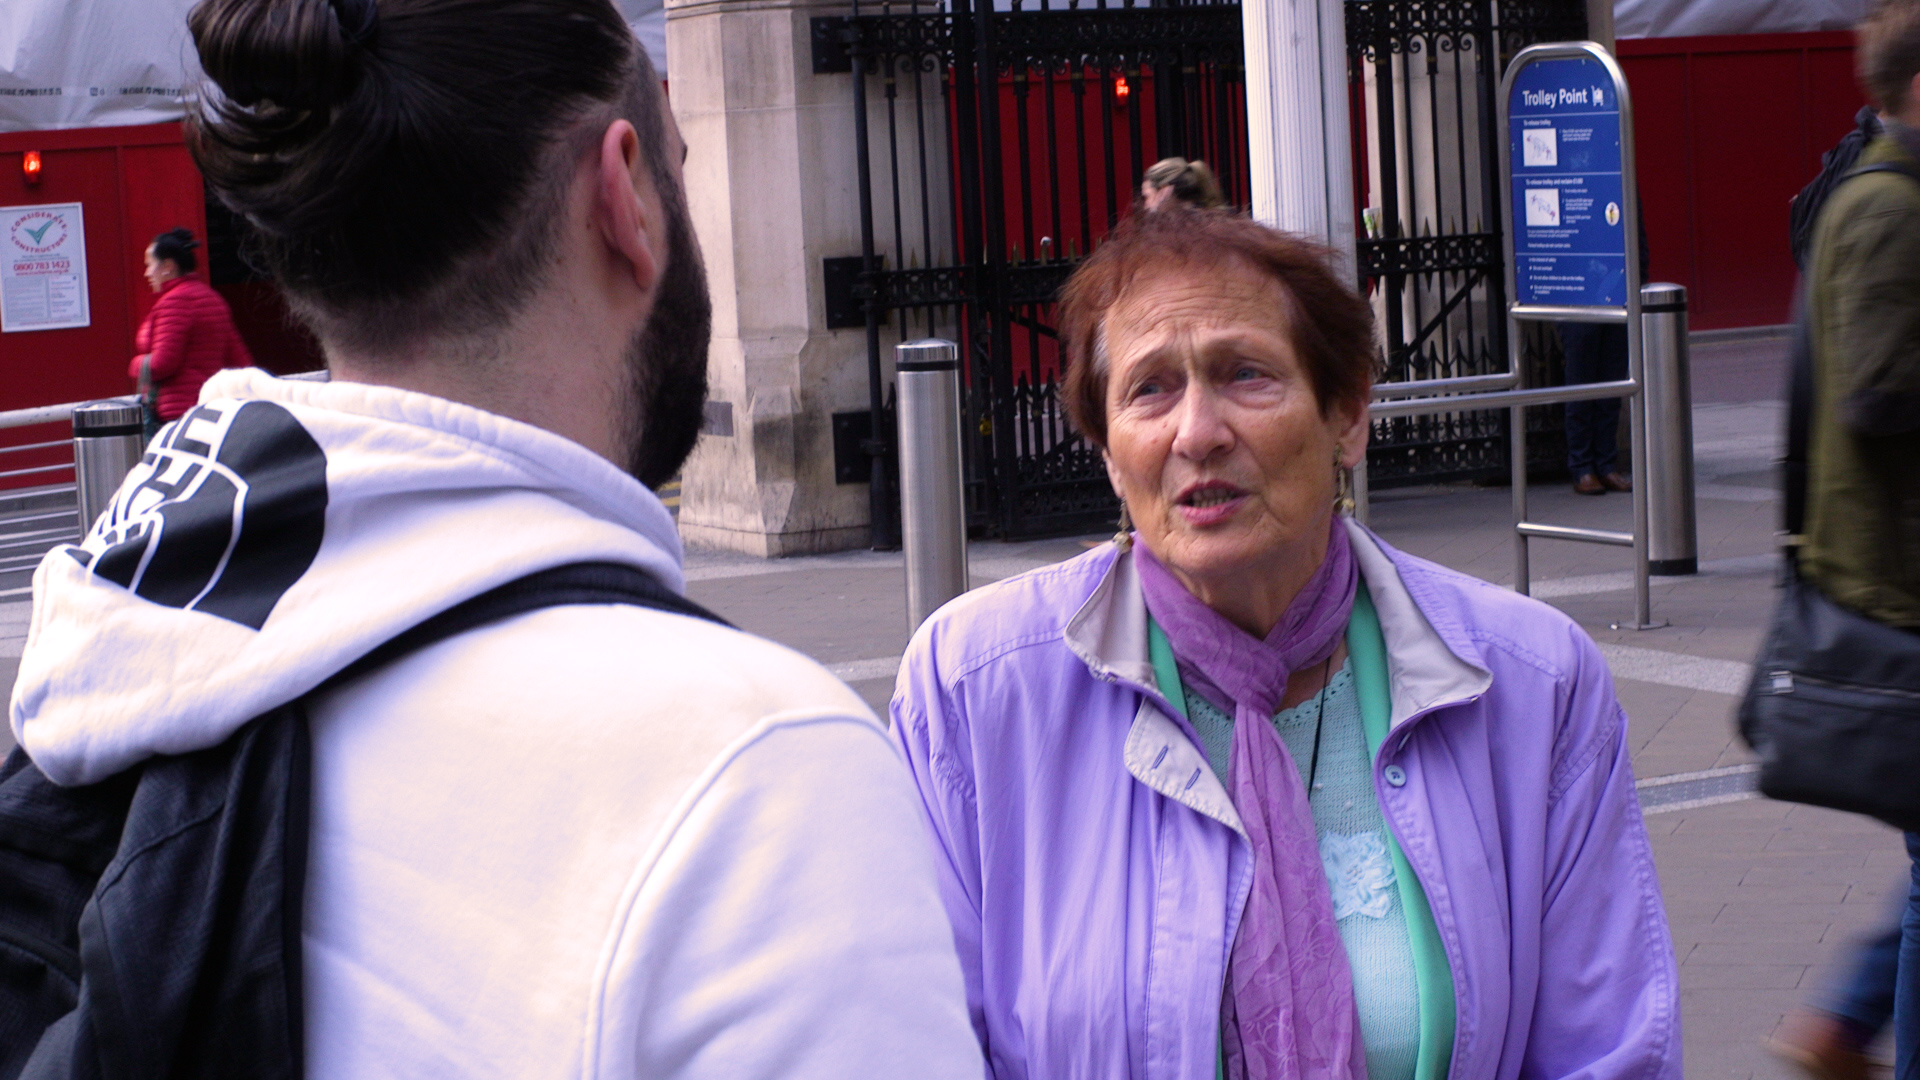 Holocaust survivor Ruth educates a young man about Kindertransport in London